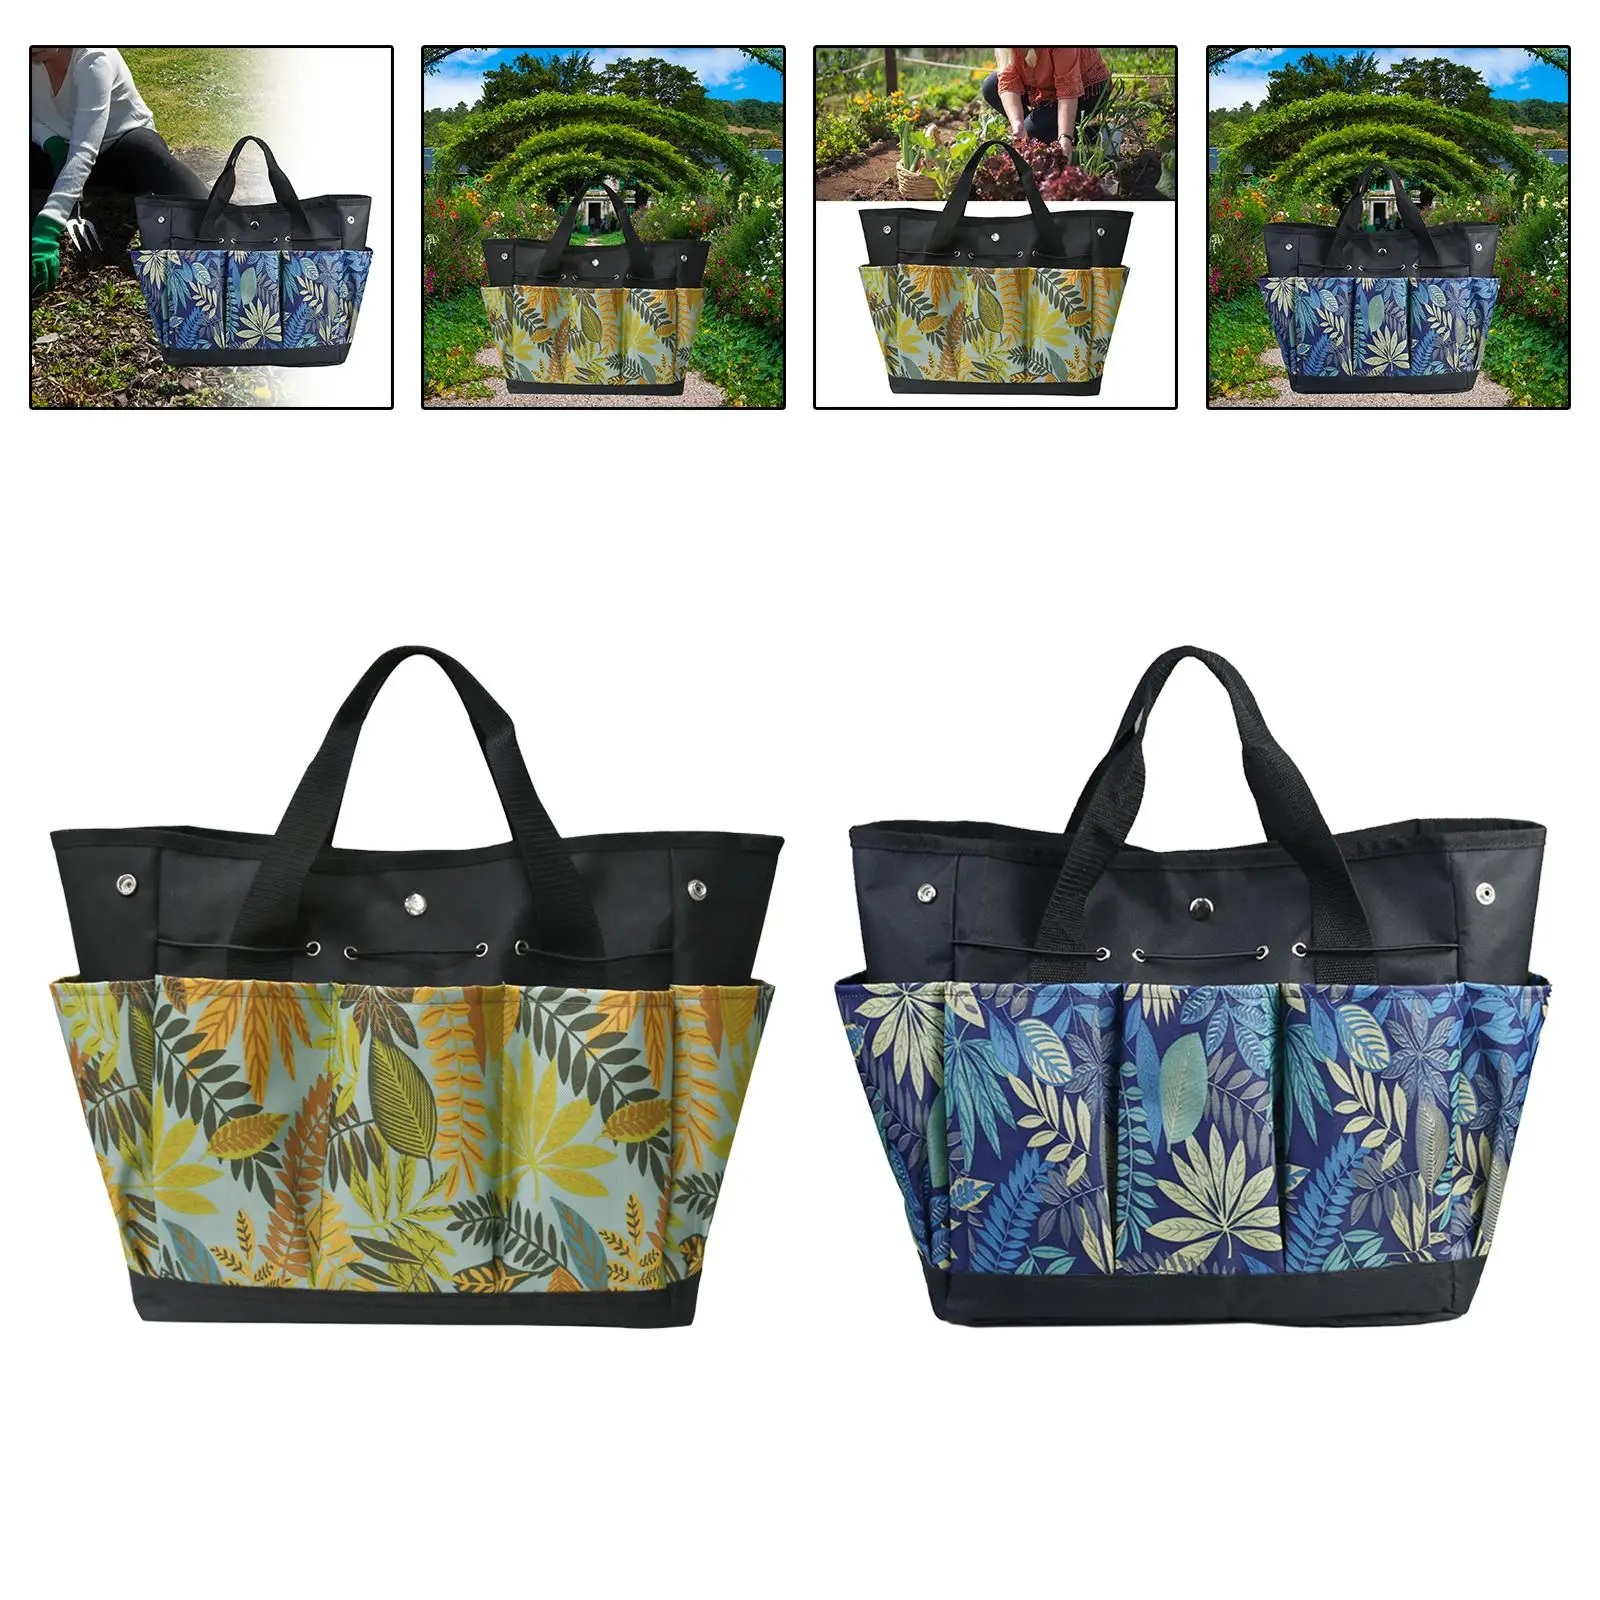 Garden Tote Bag with Pockets Multi Pockets Portable Multipurpose Tool Storage Bag for Wrenches Tape Measure Garbage Car Pliers